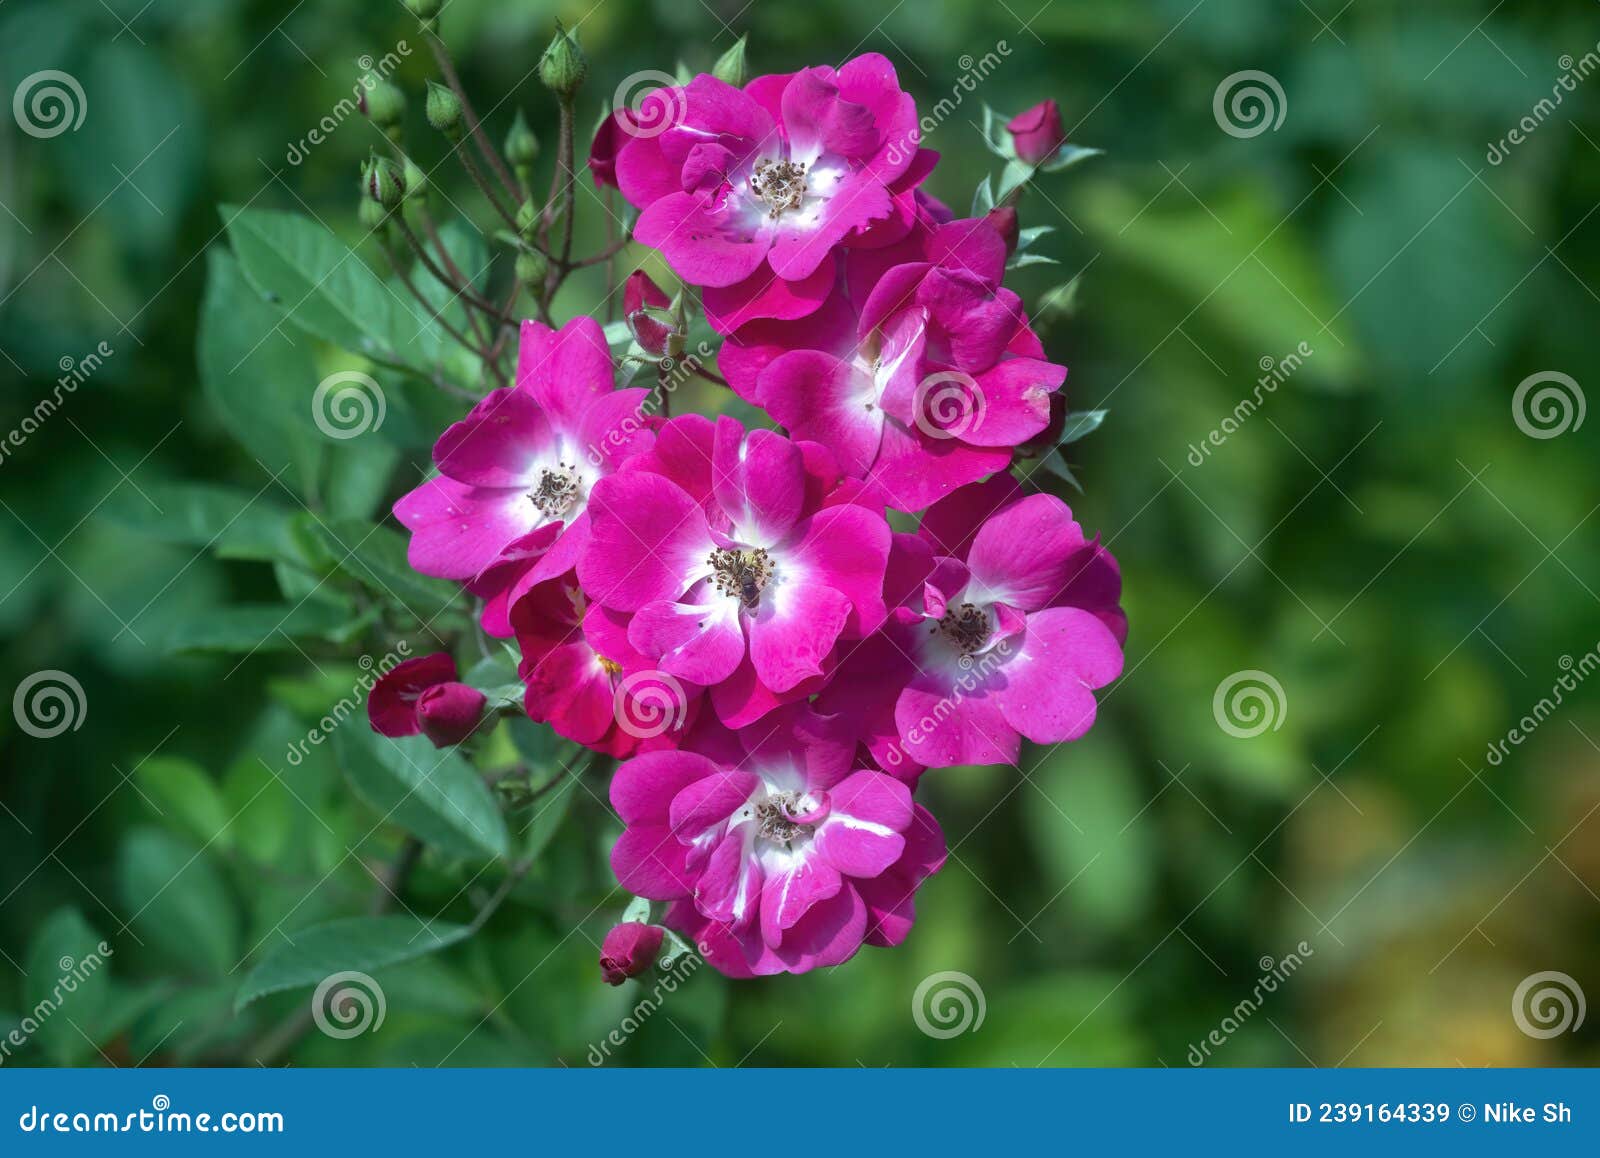 Musk rose flowers stock image. Image of bloom, rosa - 239164339